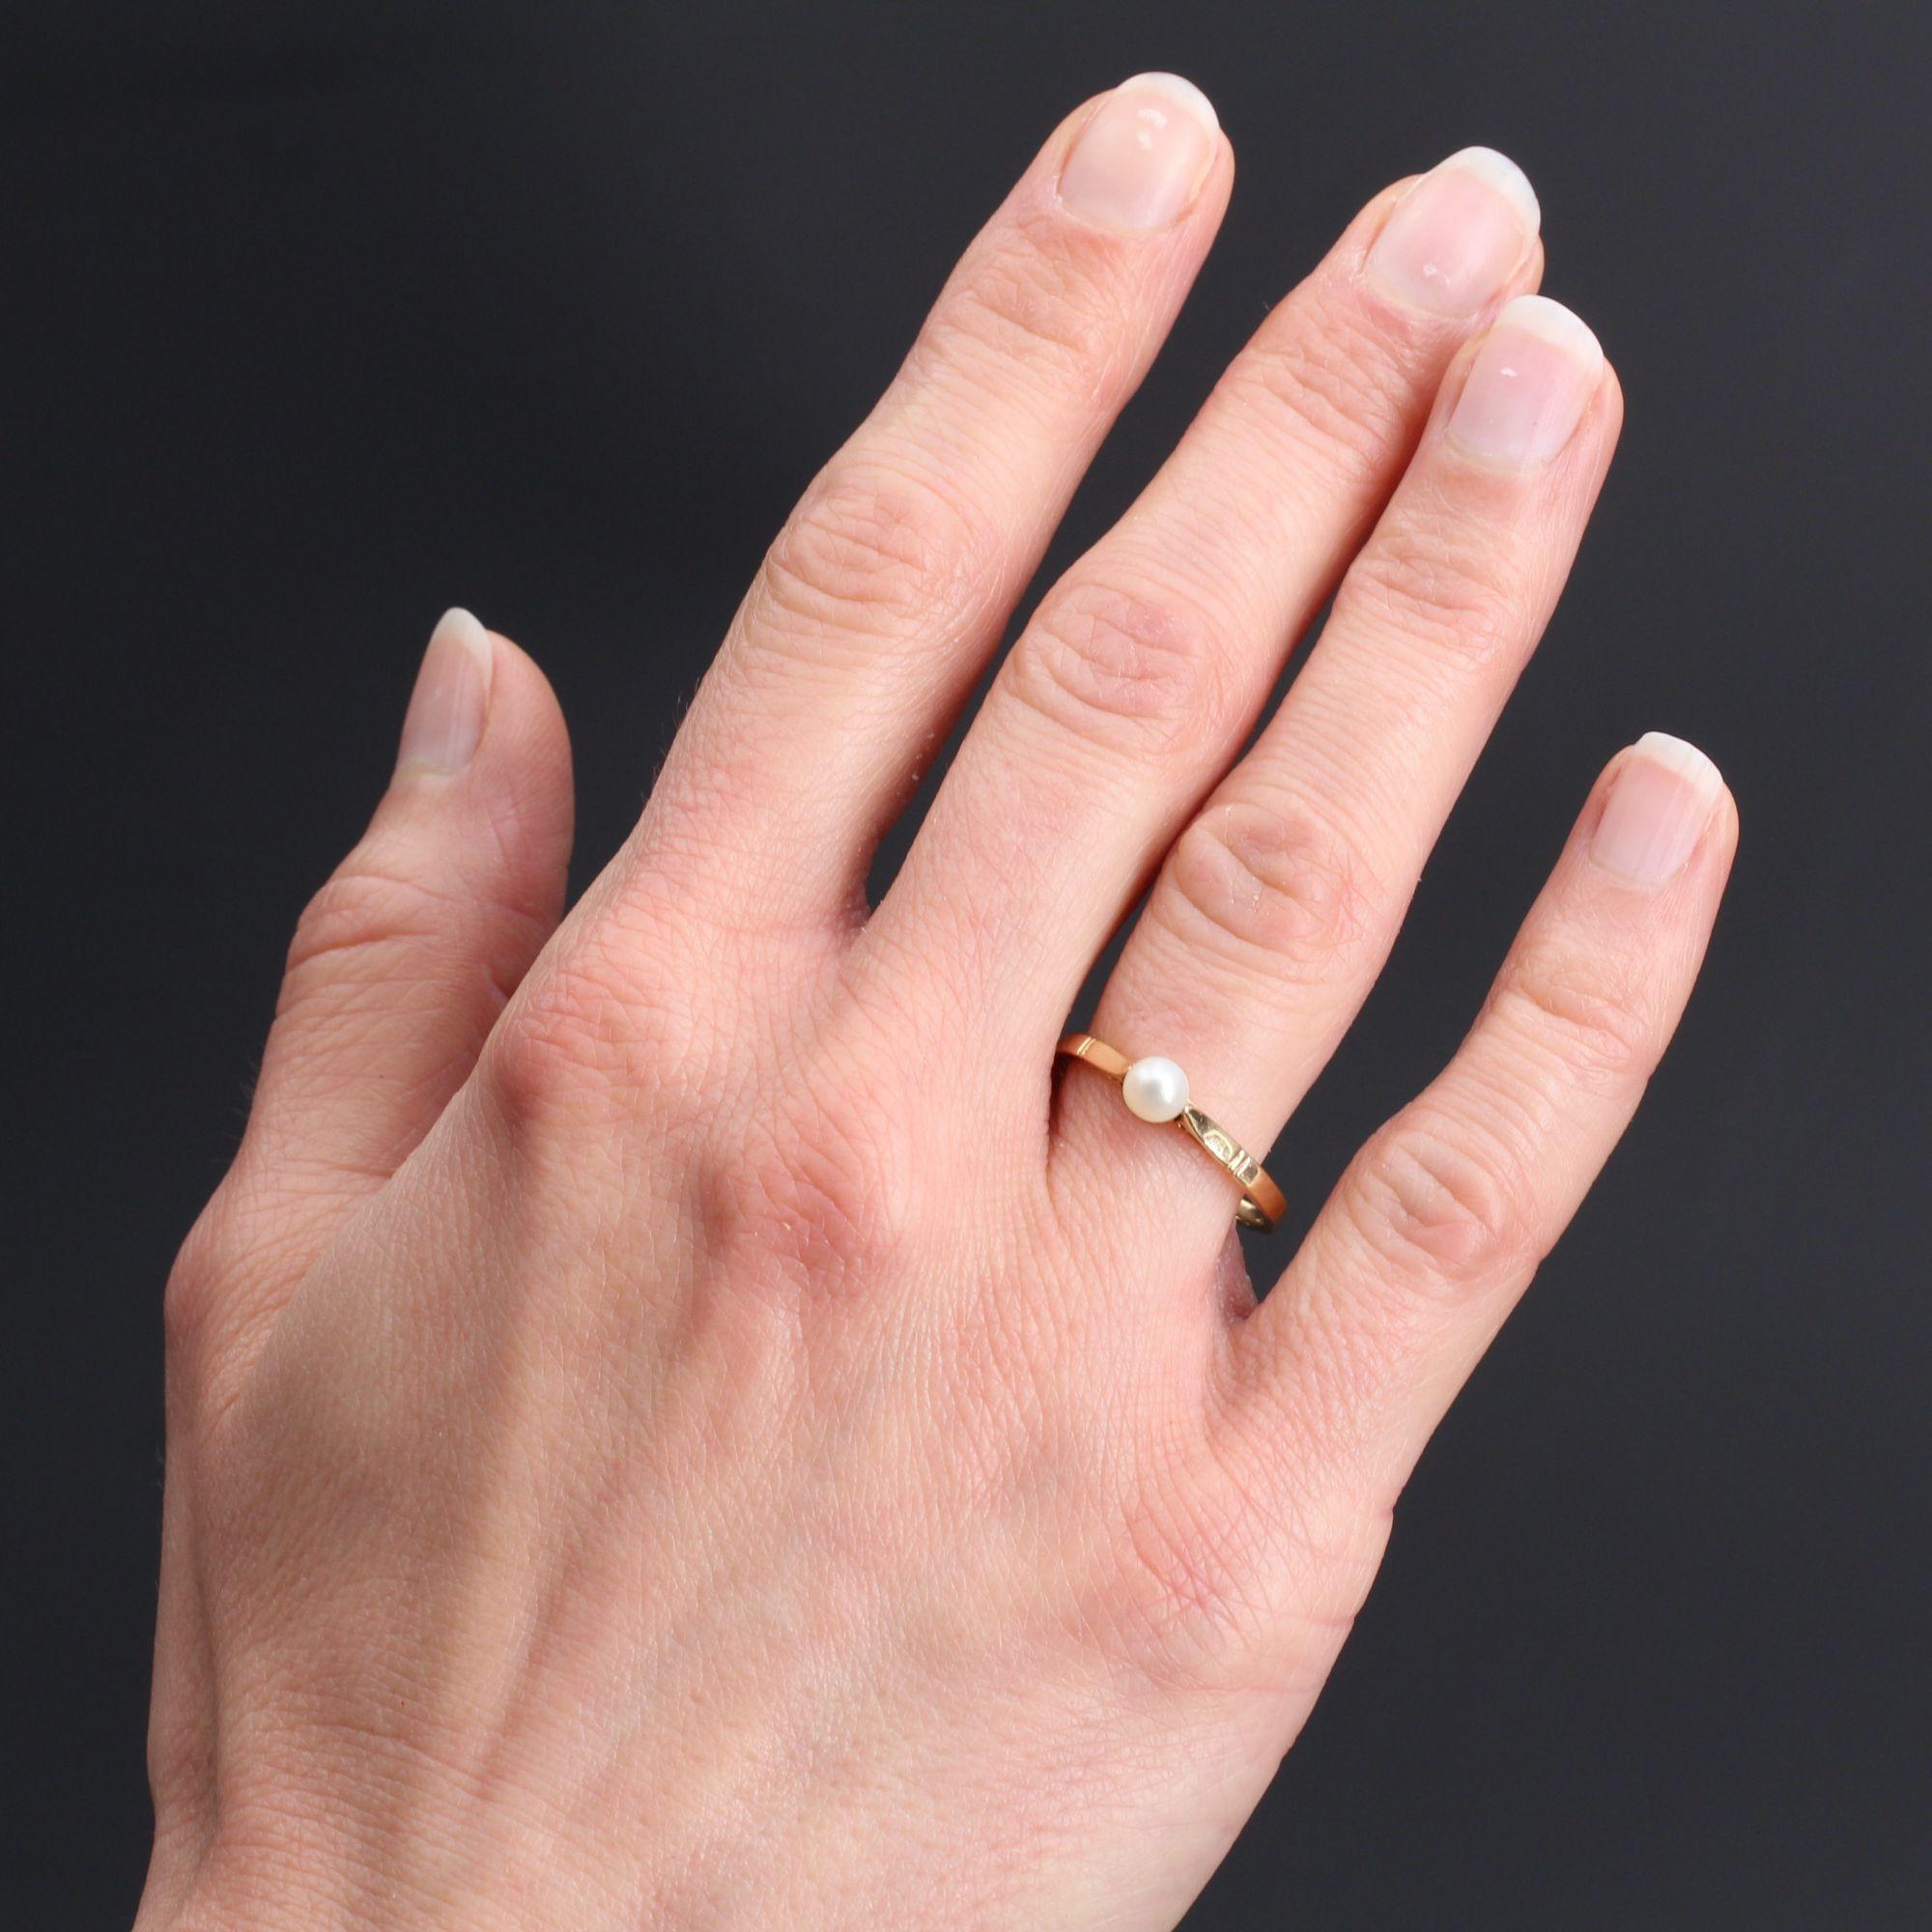 Ring in 18 karat yellow gold.
Sober and elegant, this thin antique ring is decorated with a solitaire white orient cultured pearl.
Diameter of the pearl : 4.5/5 mm.
Height : 4.4 mm, width : 5.7 mm, thickness : 5 mm, width of the ring at the base :